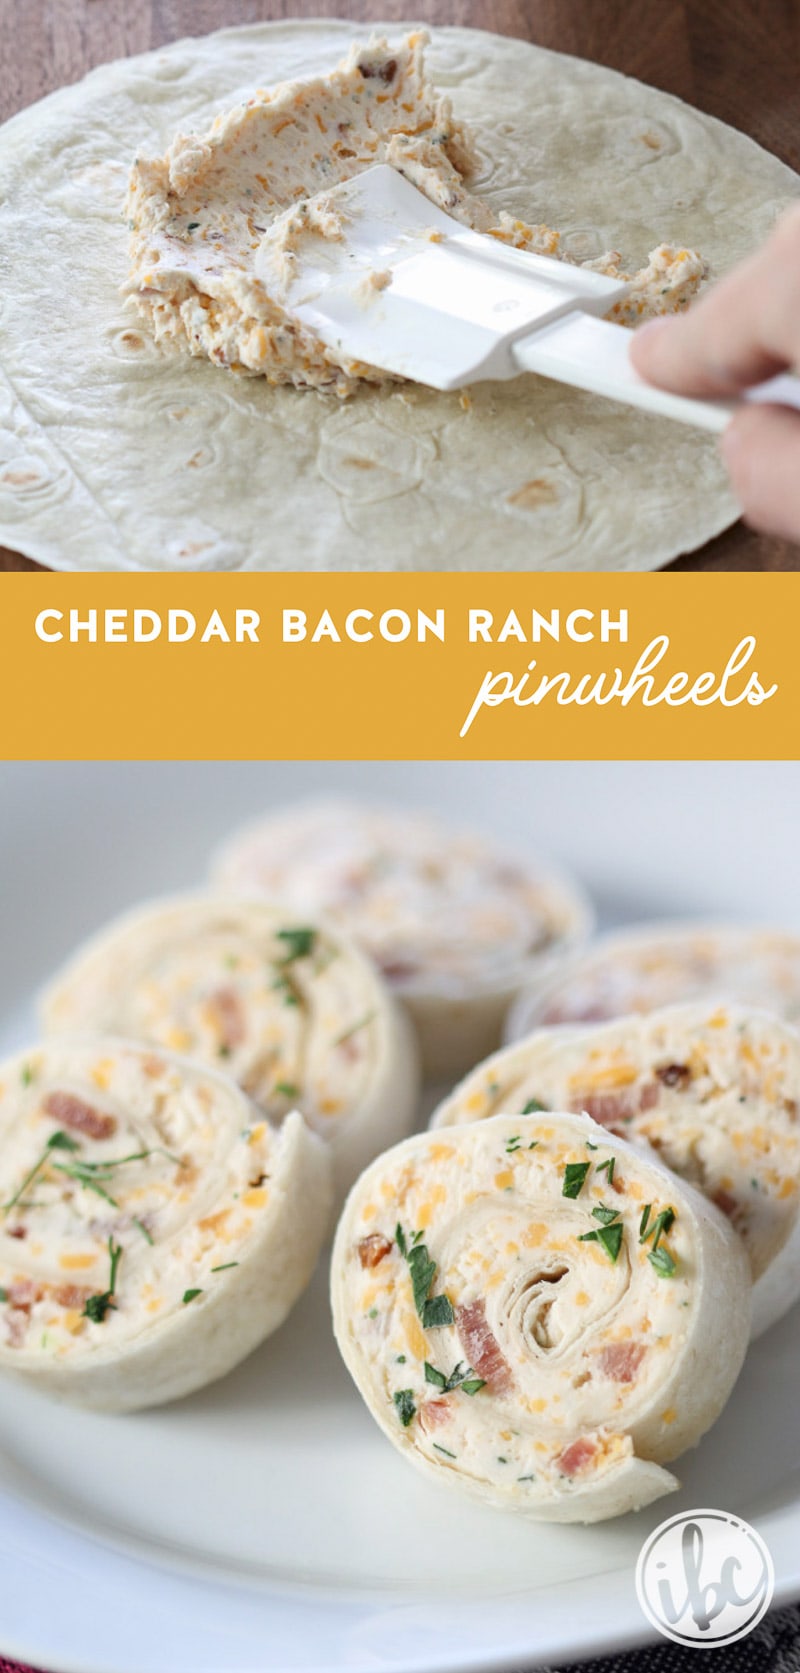 Need a quick and delicious appetizer? Try these Cheddar Bacon Ranch Tortilla Pinwheels! #appetizer #pinwheels #cheddar #bacon #ranch